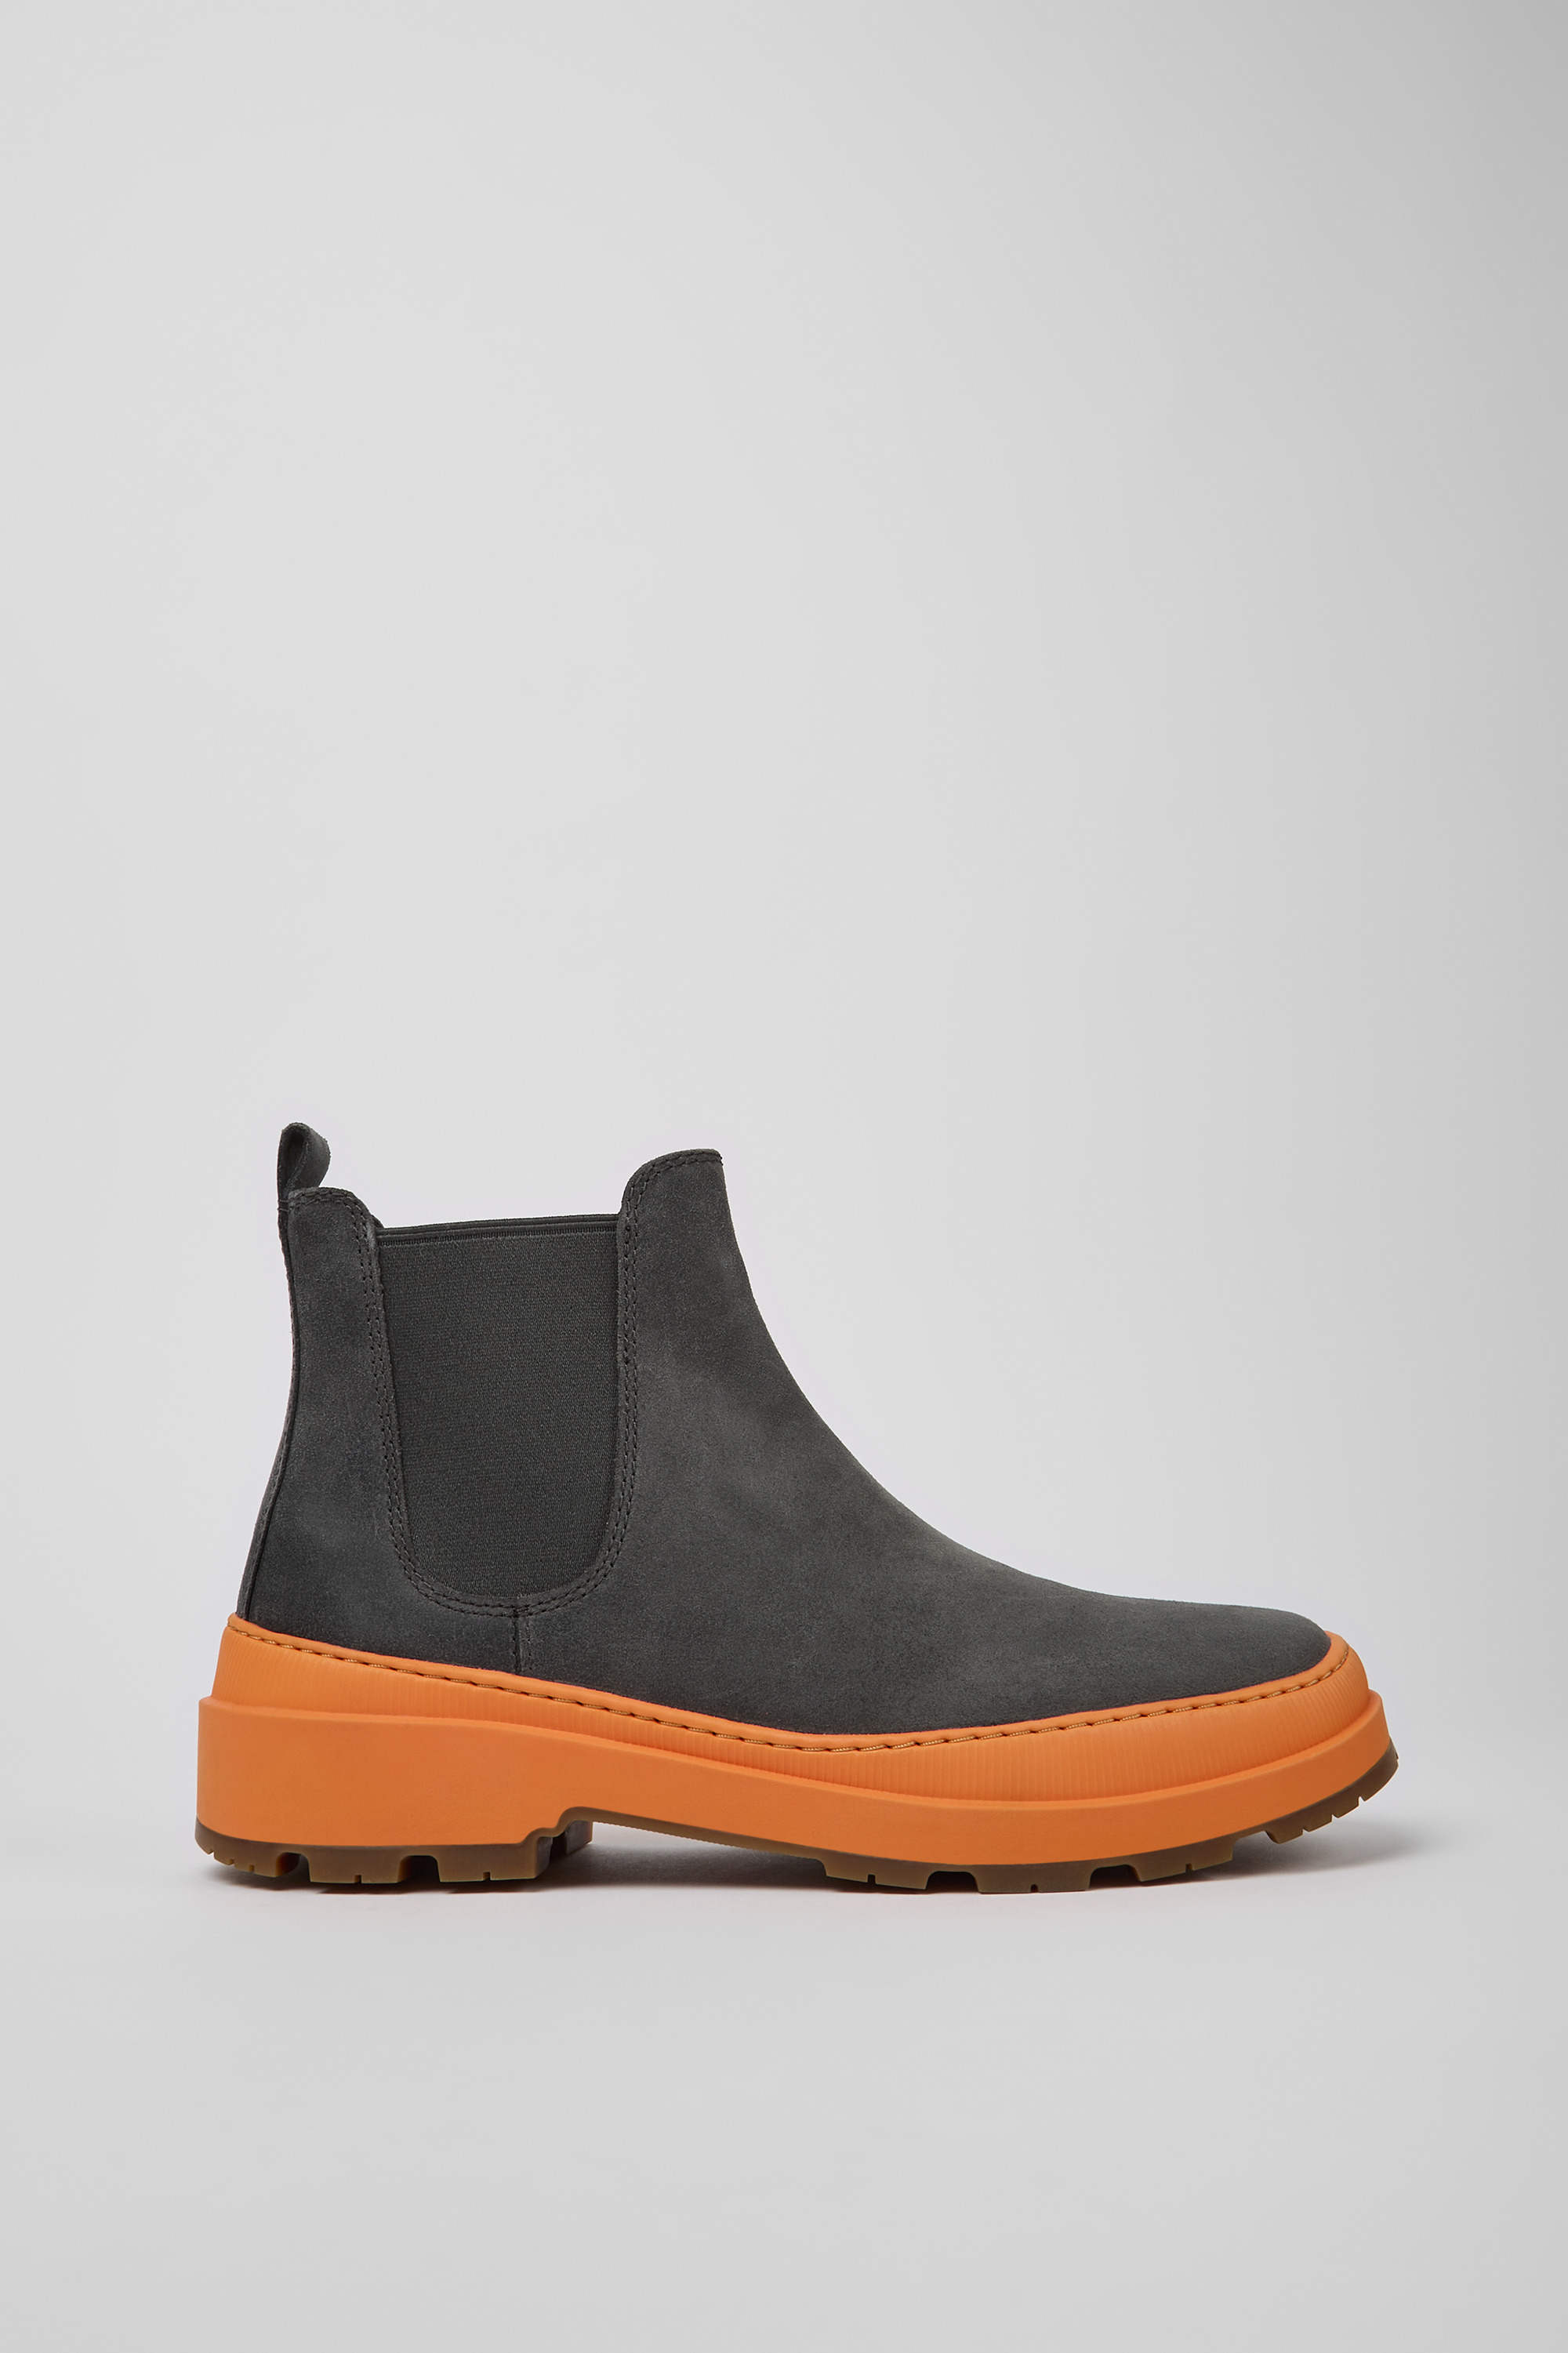 BRUTUS Grey Boots for Men - Autumn/Winter collection - Camper